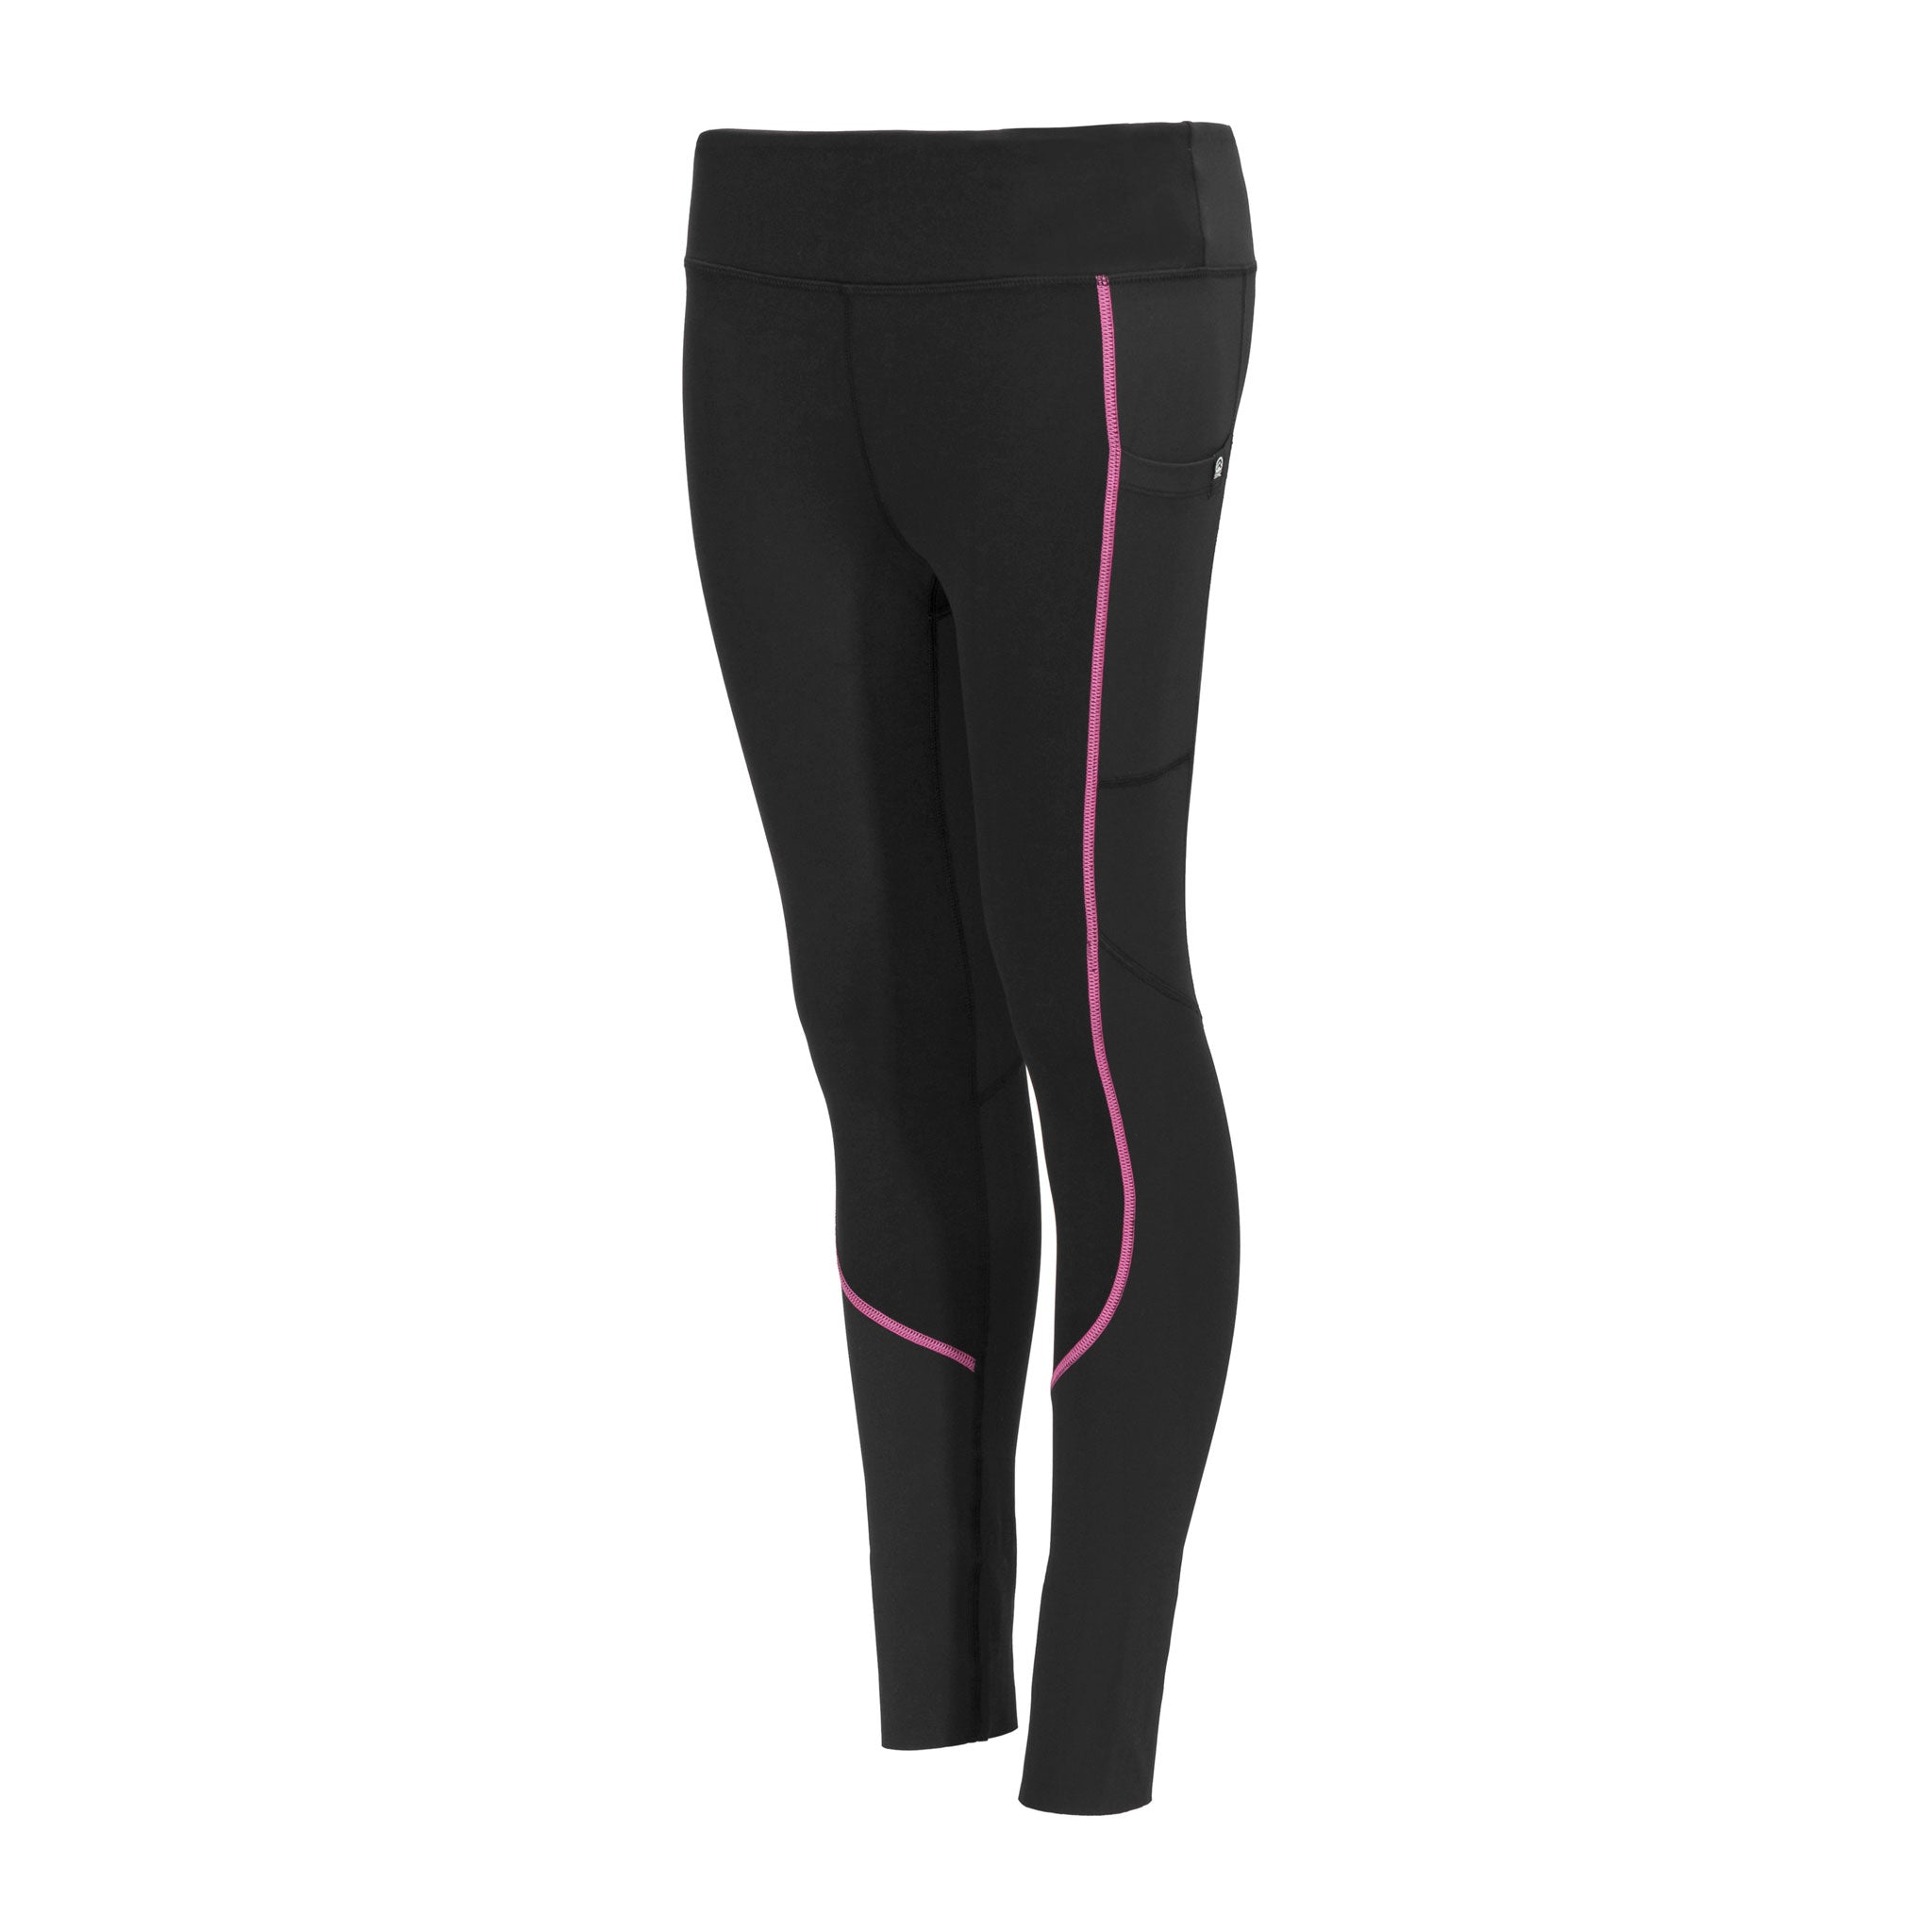 OOSC That 70's Show Womens Baselayer Legging